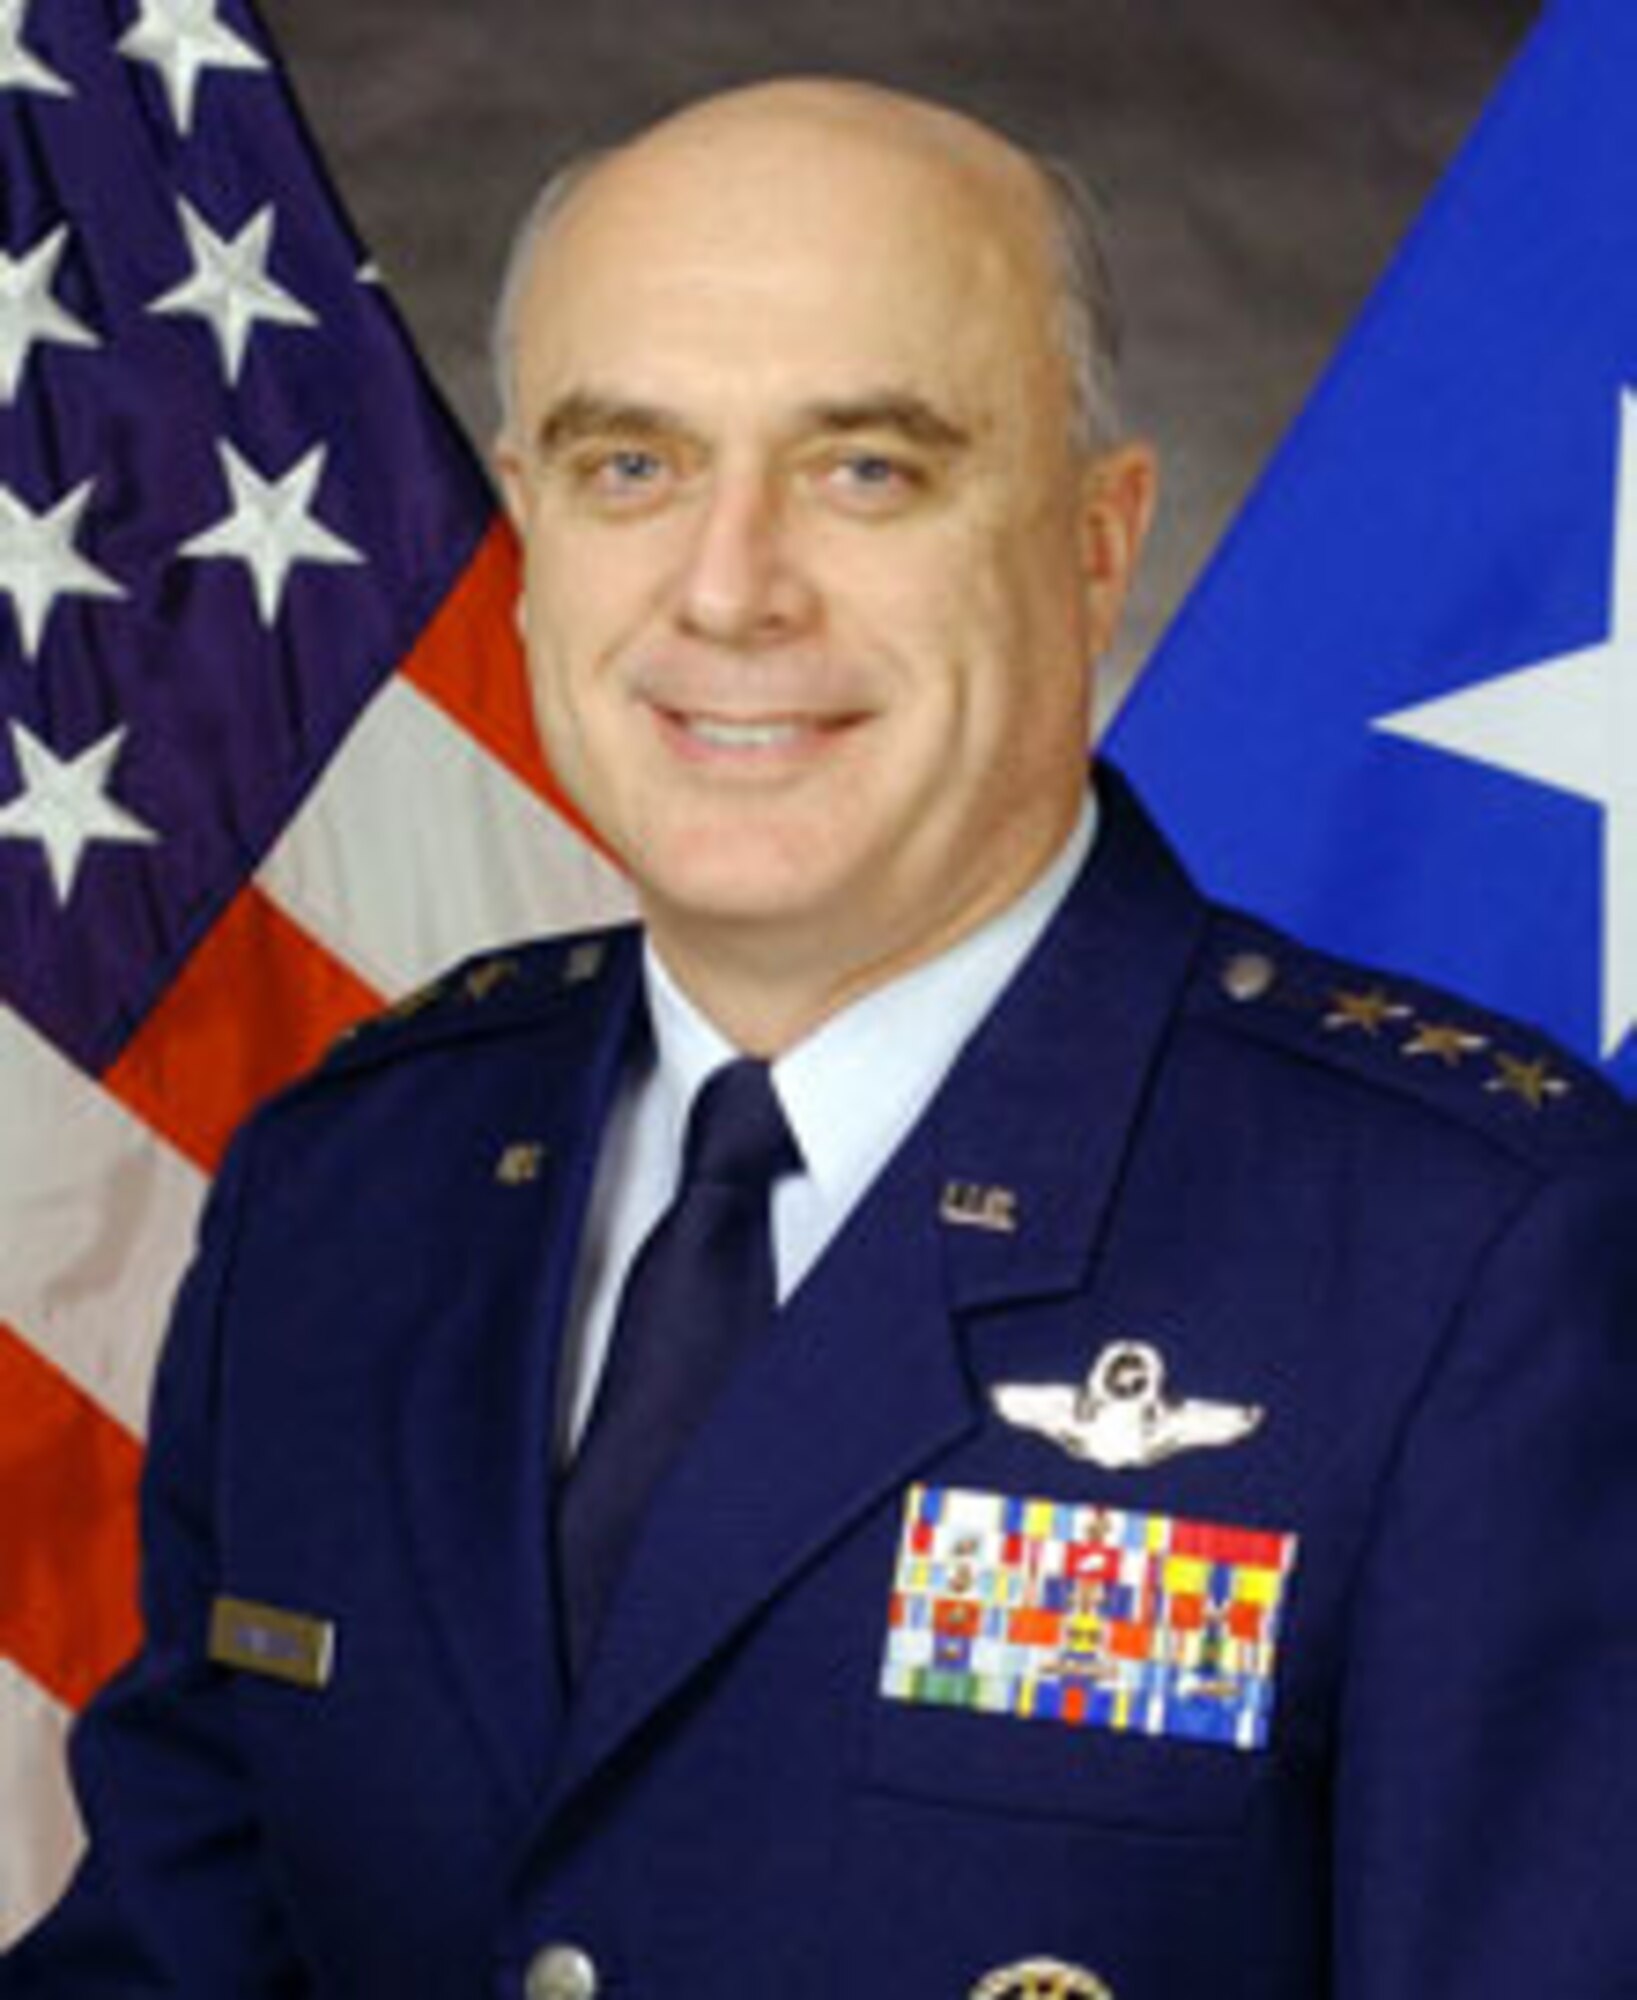 The Senate Armed Services Committee confirmed Lieutenant General Carrol H. "Howie" Chandler's promotion to general and appointment as the next commander of Pacific Air Forces with change of command scheduled for Nov. 30 at Hickam Air Force Base.  (U.S. Air Force photo) 
